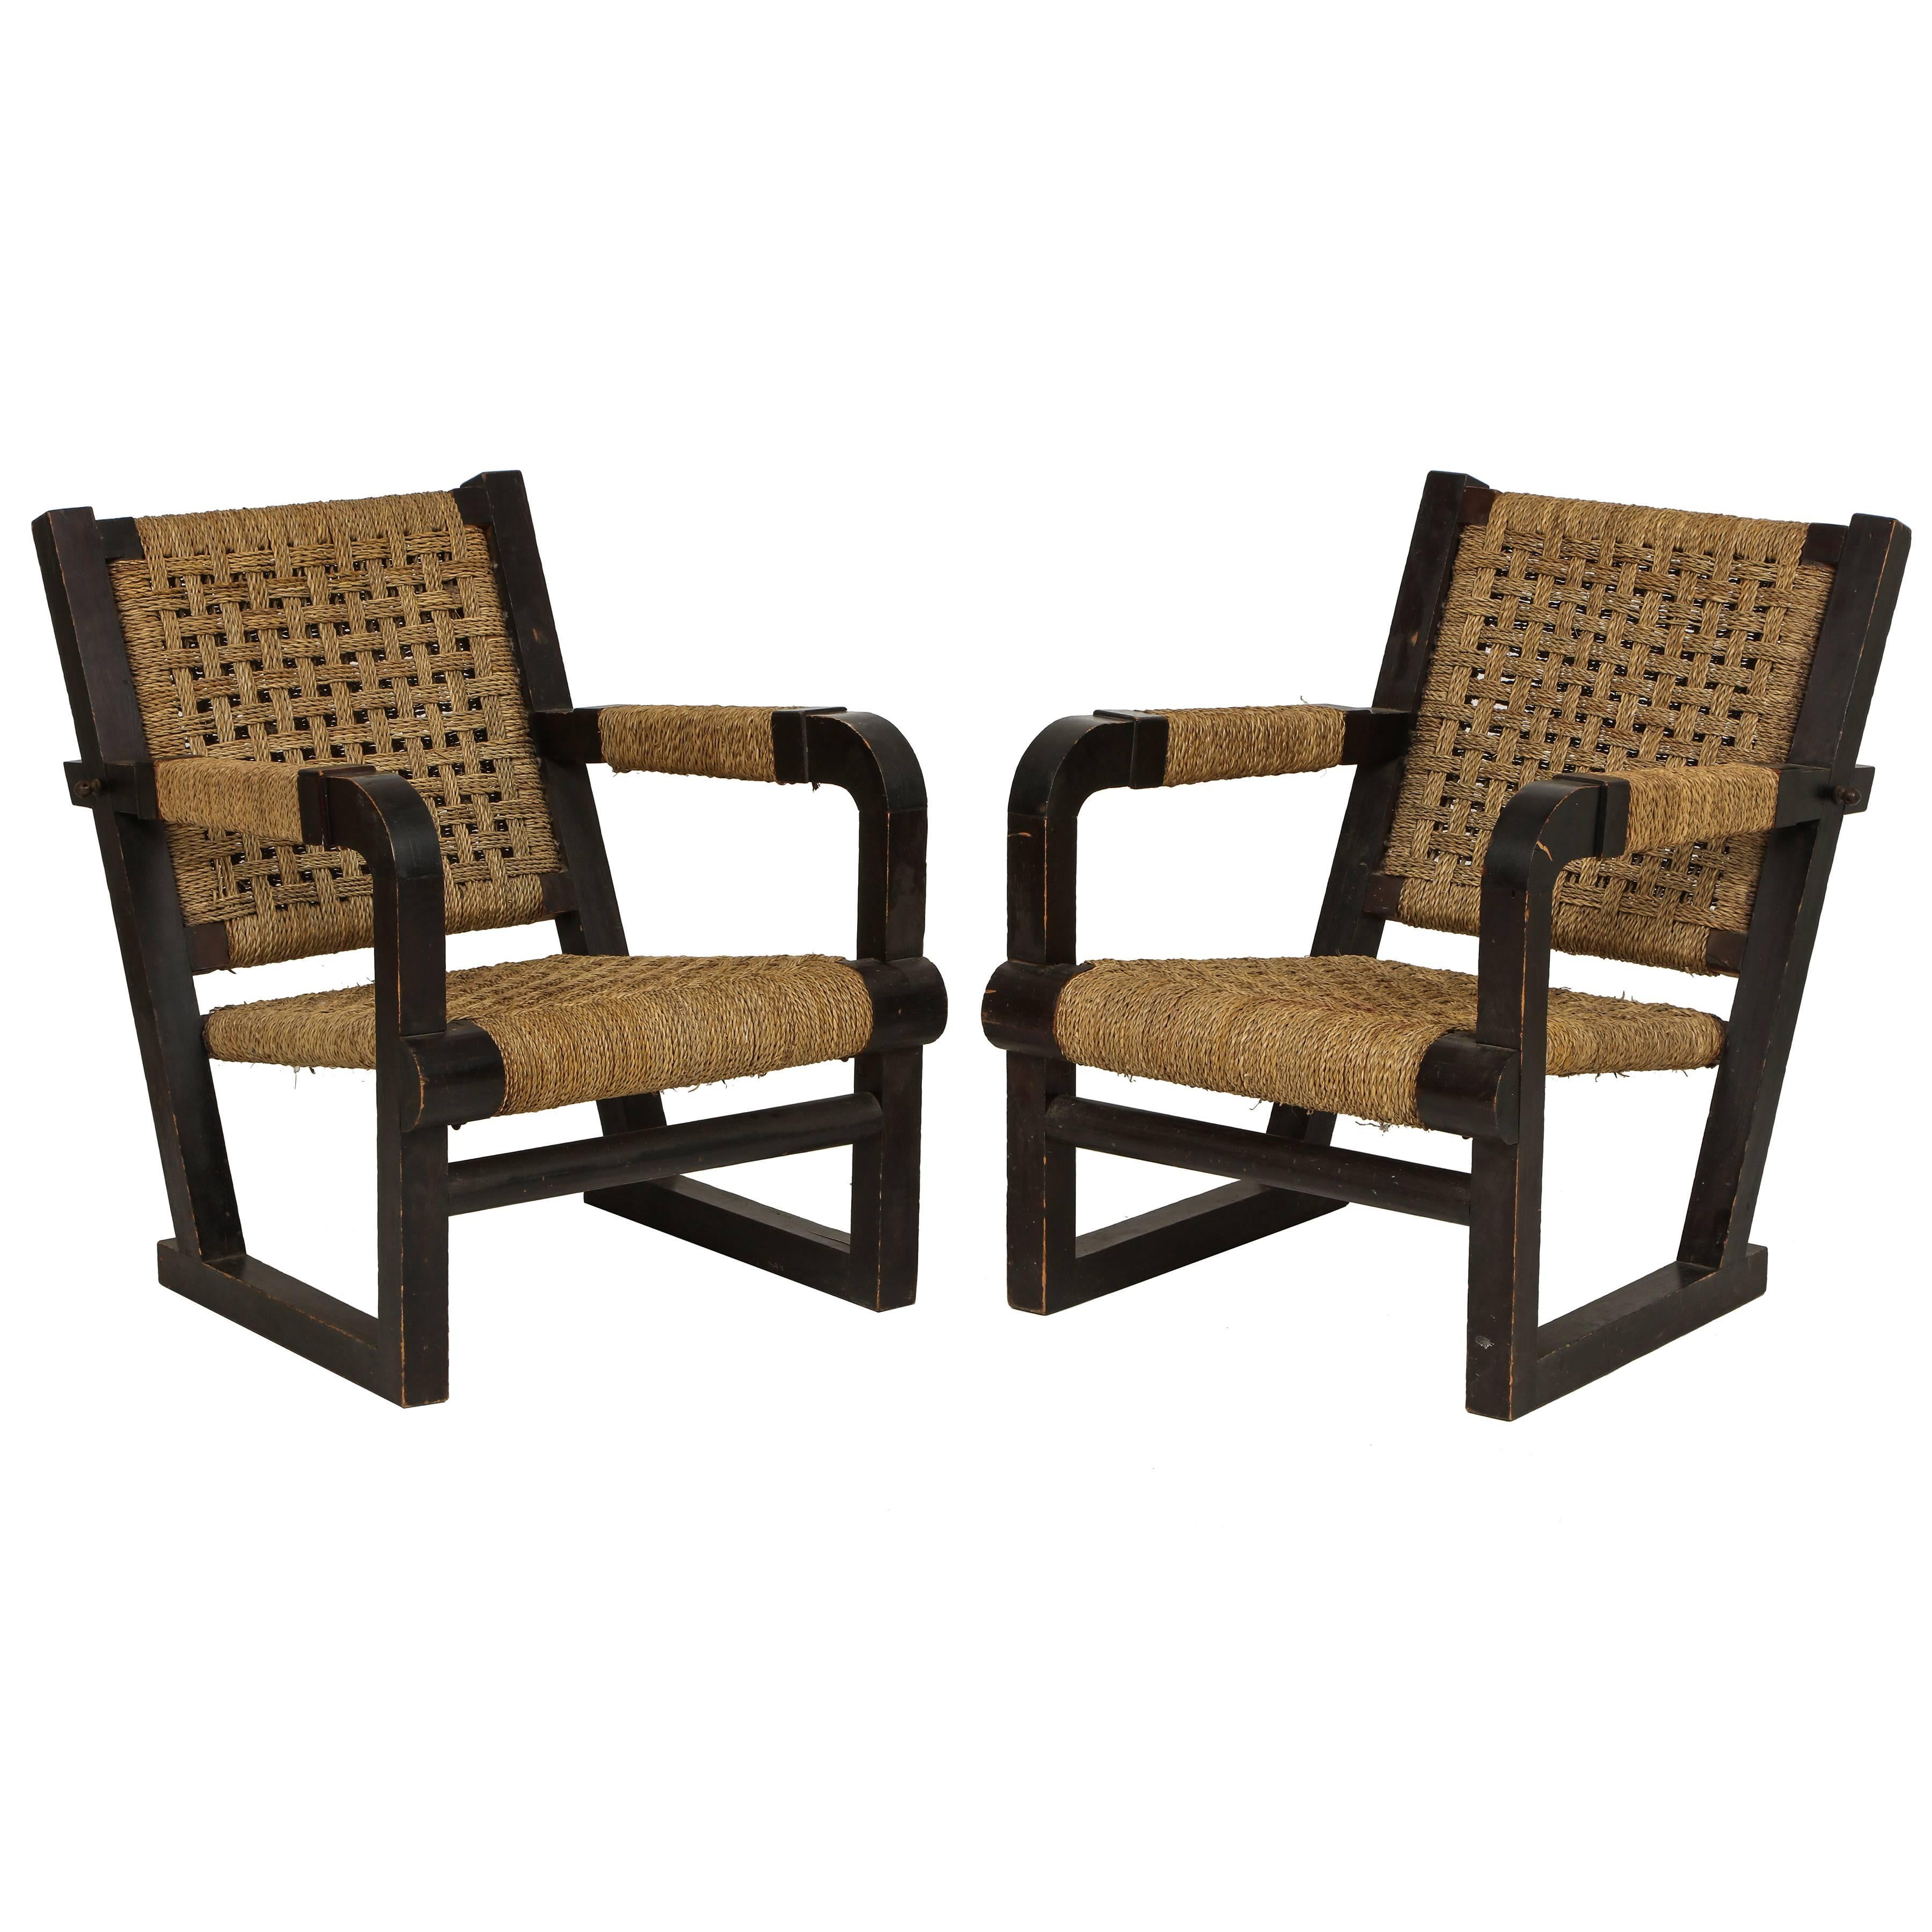 Francis Jourdain attributed woven chairs, French Deco, 1930s

Beautiful woven French chairs, from the Deco period. The woven seating is in overall very good condition with lovely patina to the dark wood.
The chairs are deep and heavy.

Height: